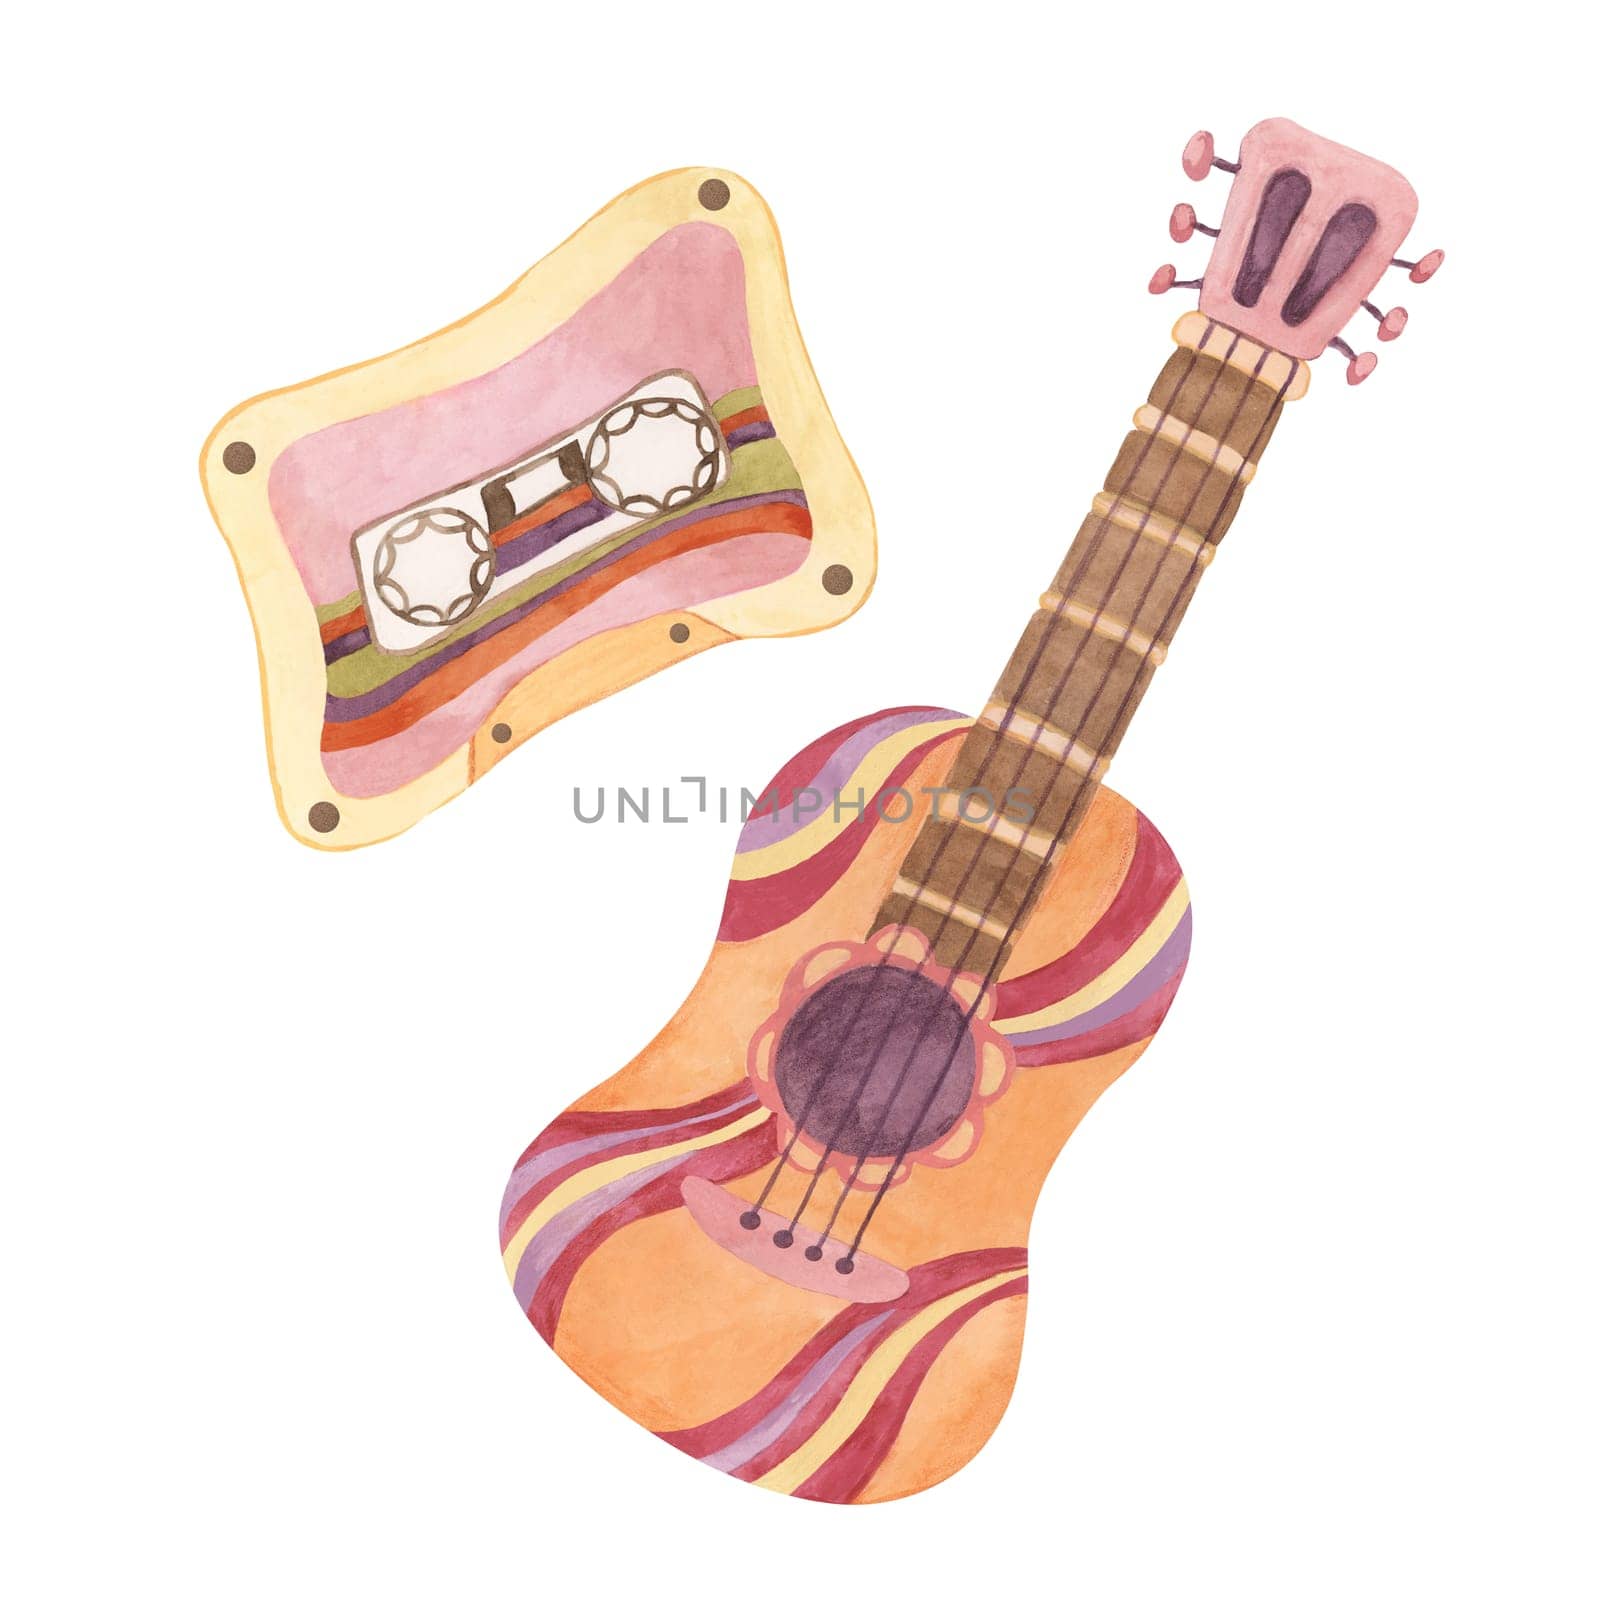 Retro trippy guitar and audiotape in 1970s style. Hippie vibes music culture nostalgic clipart. Watercolor vintage groovy illustration for printing, stickers, flyers, t-shirts, posters, party cards